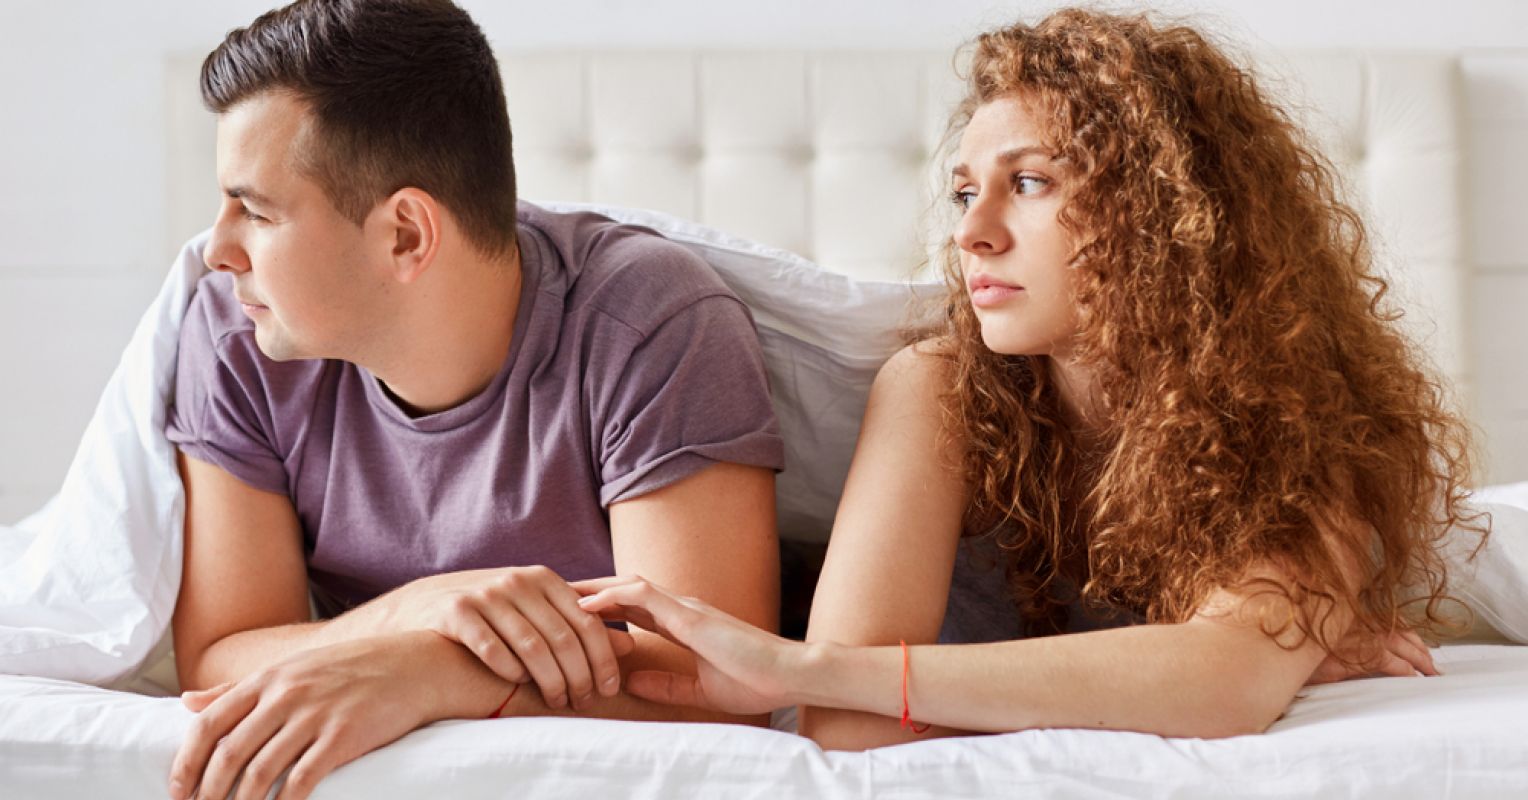 7 Key Reasons Why Some Women Cheat Psychology Today pic